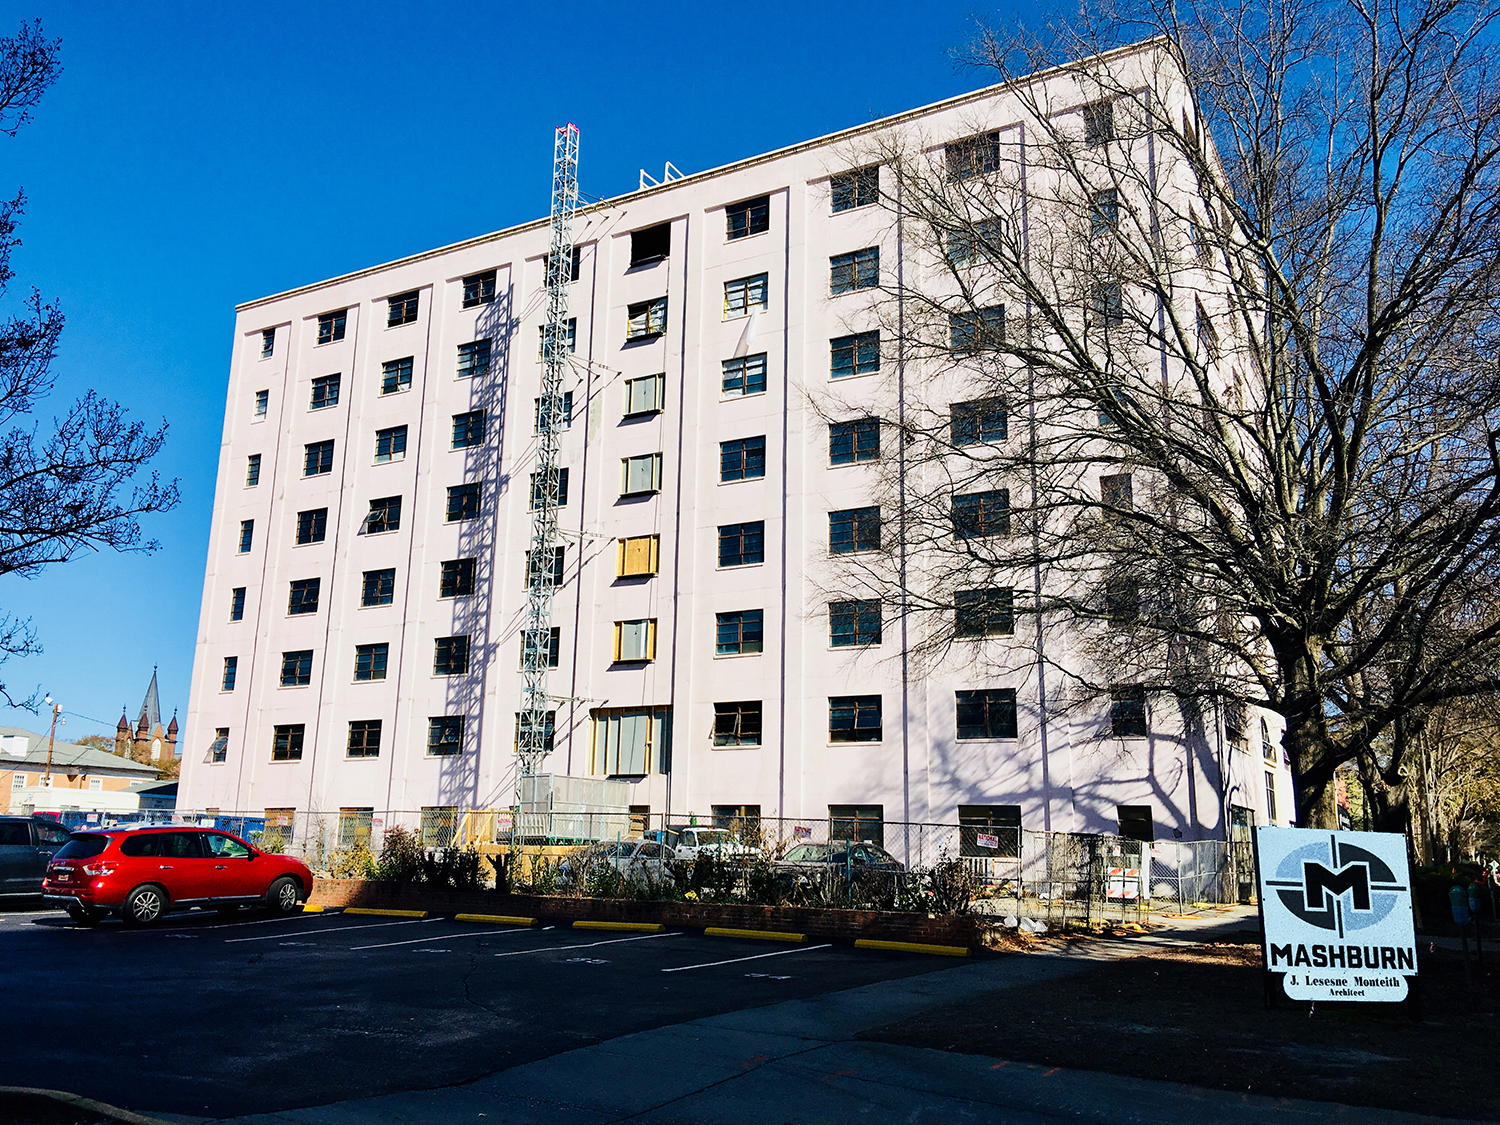 1321 Lofts, located at 1321 Lady St., has 130 units ranging from $950 to $1,250 per month. (Photo/File)